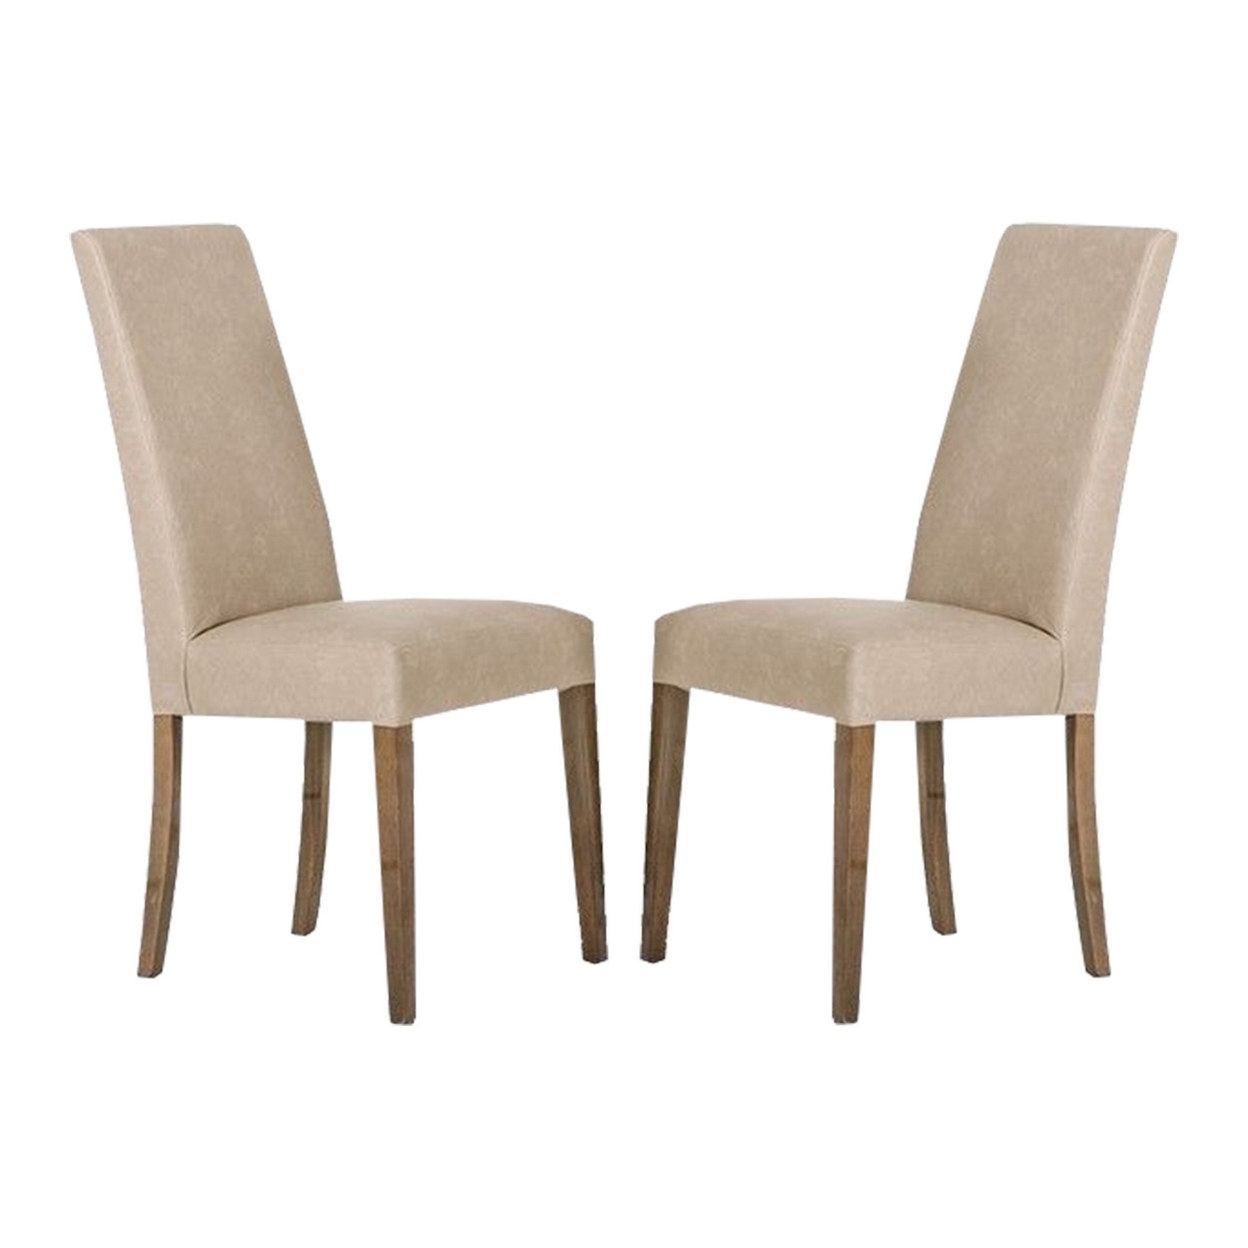 18 Inch Dining Chair, Set Of 2, Beige Vegan Faux Leather, Parson Style- Saltoro Sherpi